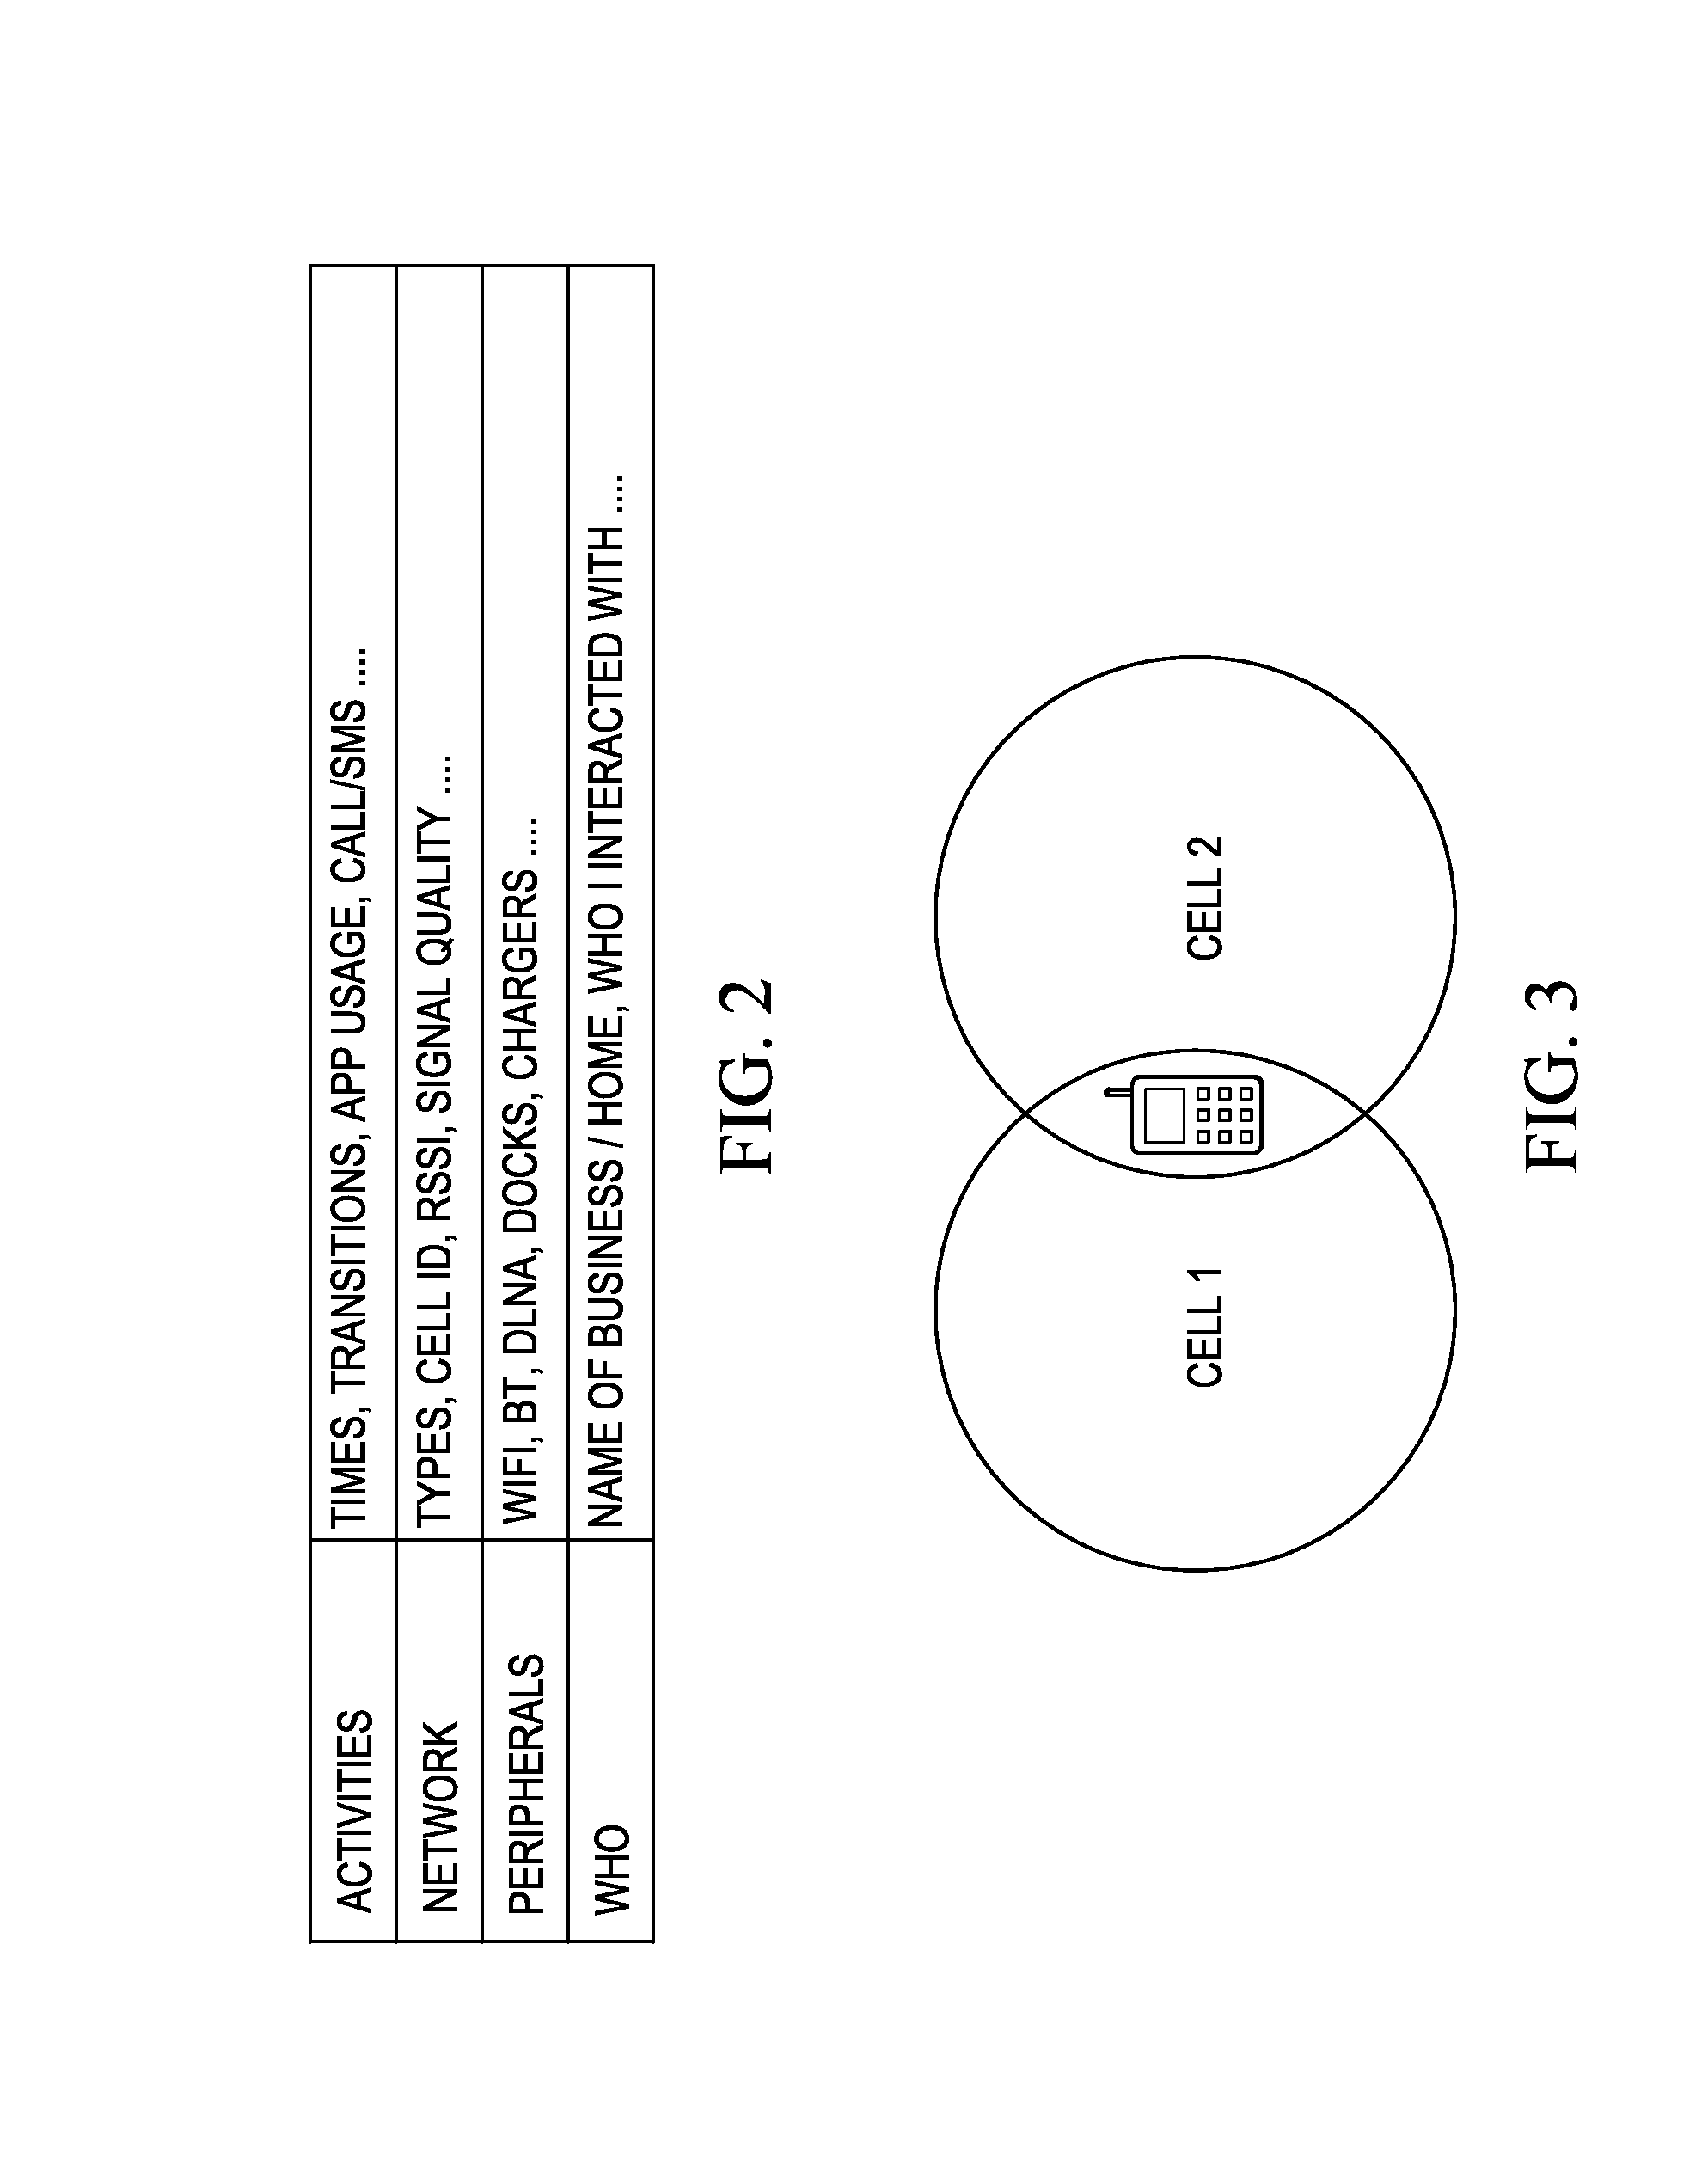 Method for improving discovery of preferred mobile computing locations